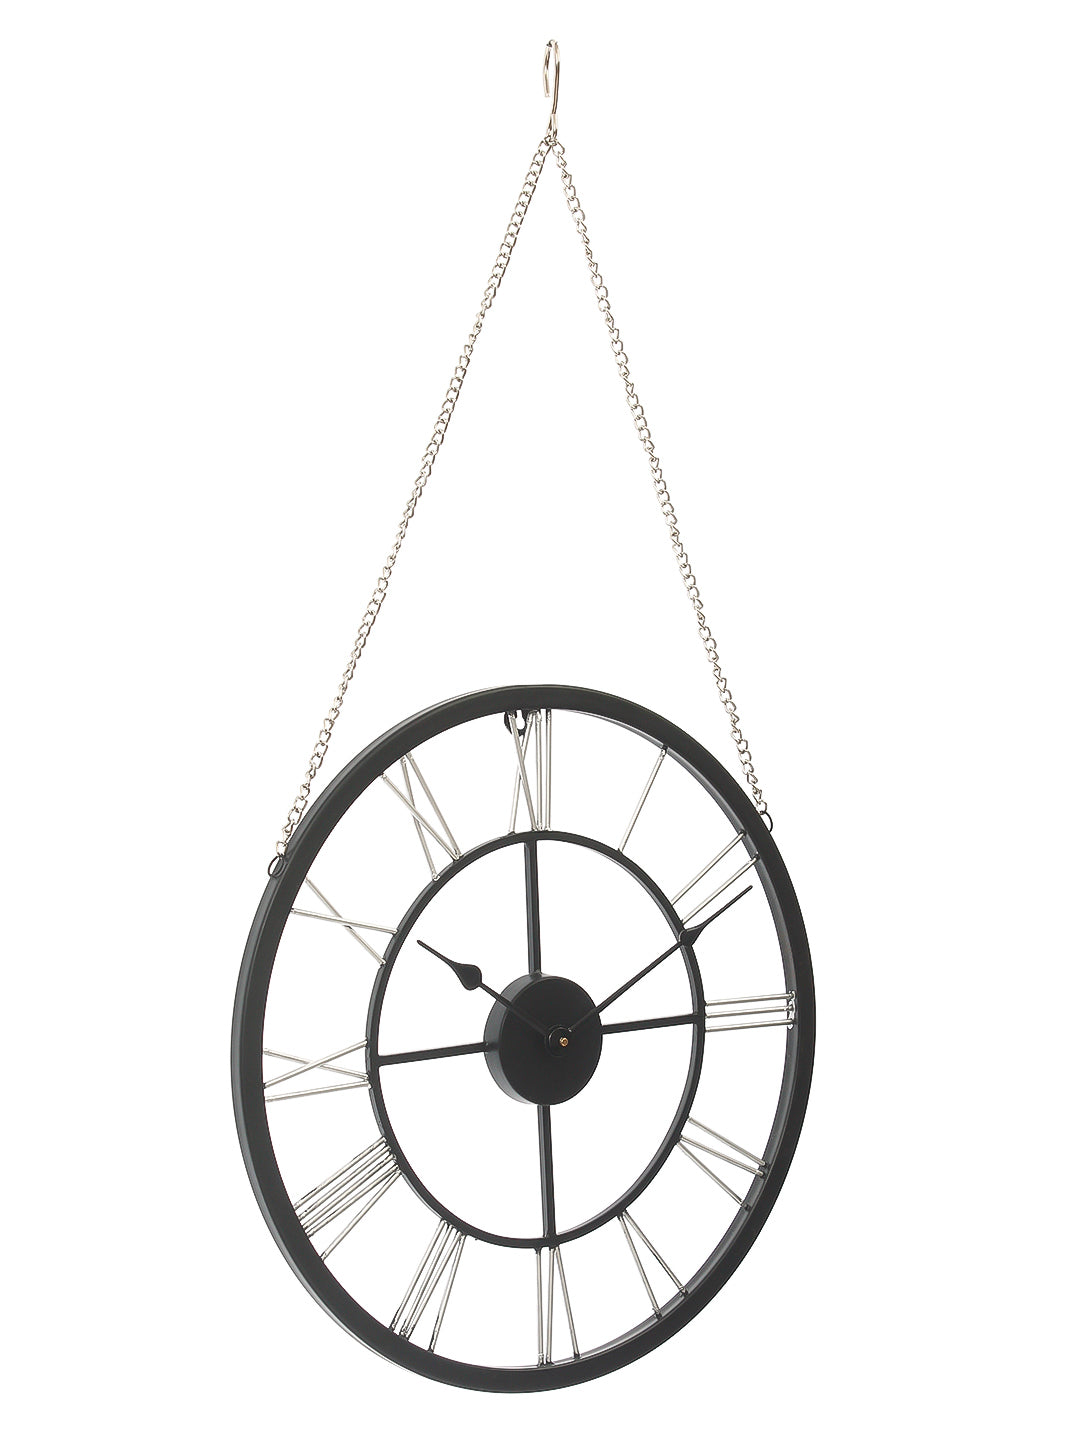 Round Black Iron Roman Numeral Handcrafted Analog Wall Clock With Hanging Chain 5